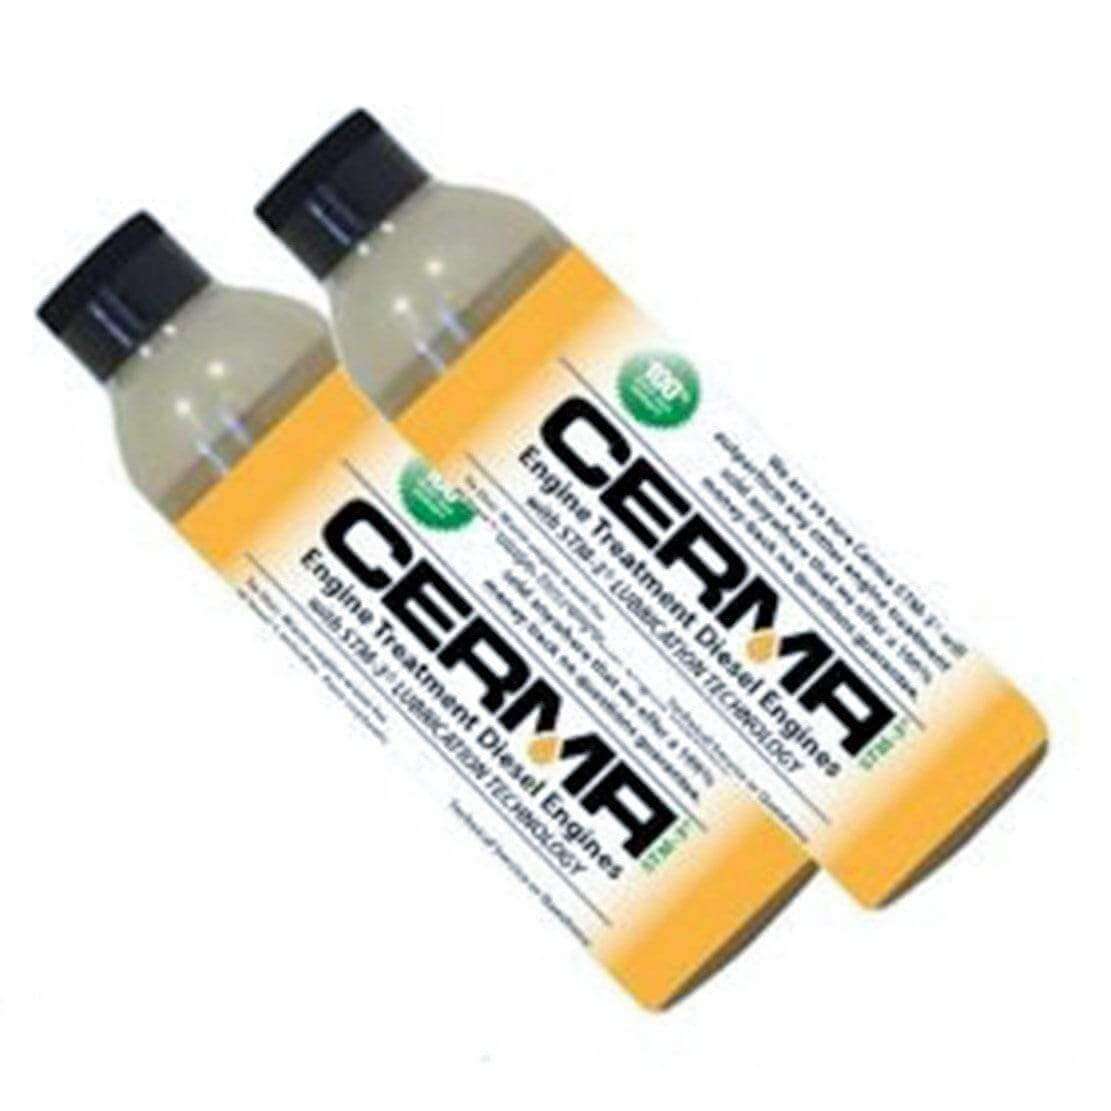 Cerma Ceramic Marine Engine Treatment at $538.45 only from cermatreatment.com